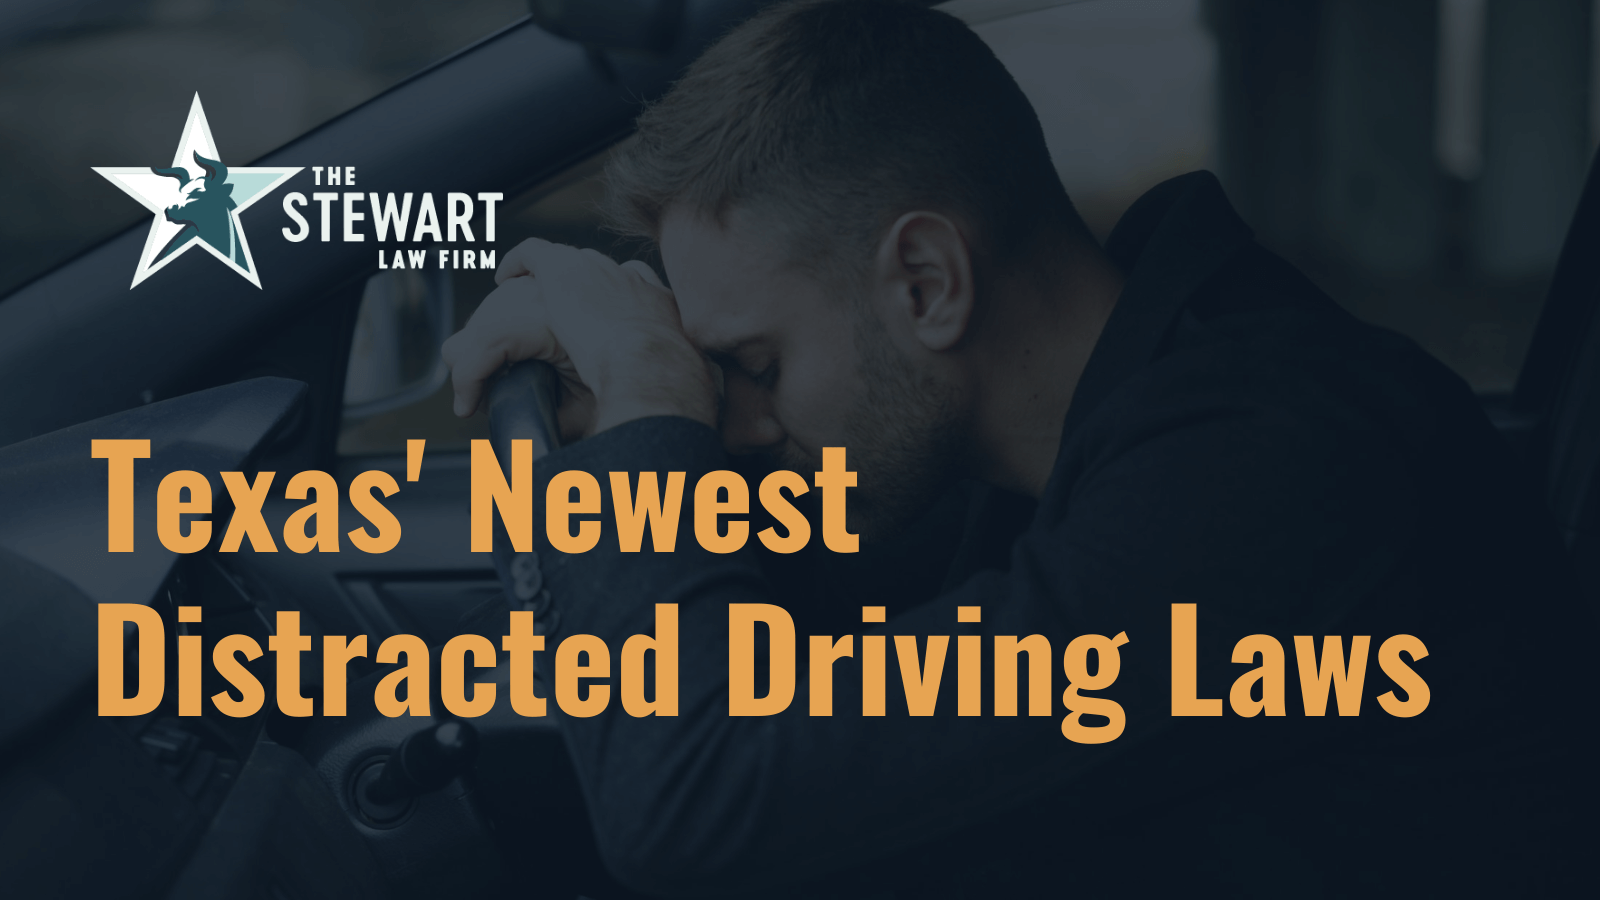 Texas' Newest Distracted Driving Laws The Stewart Law Firm